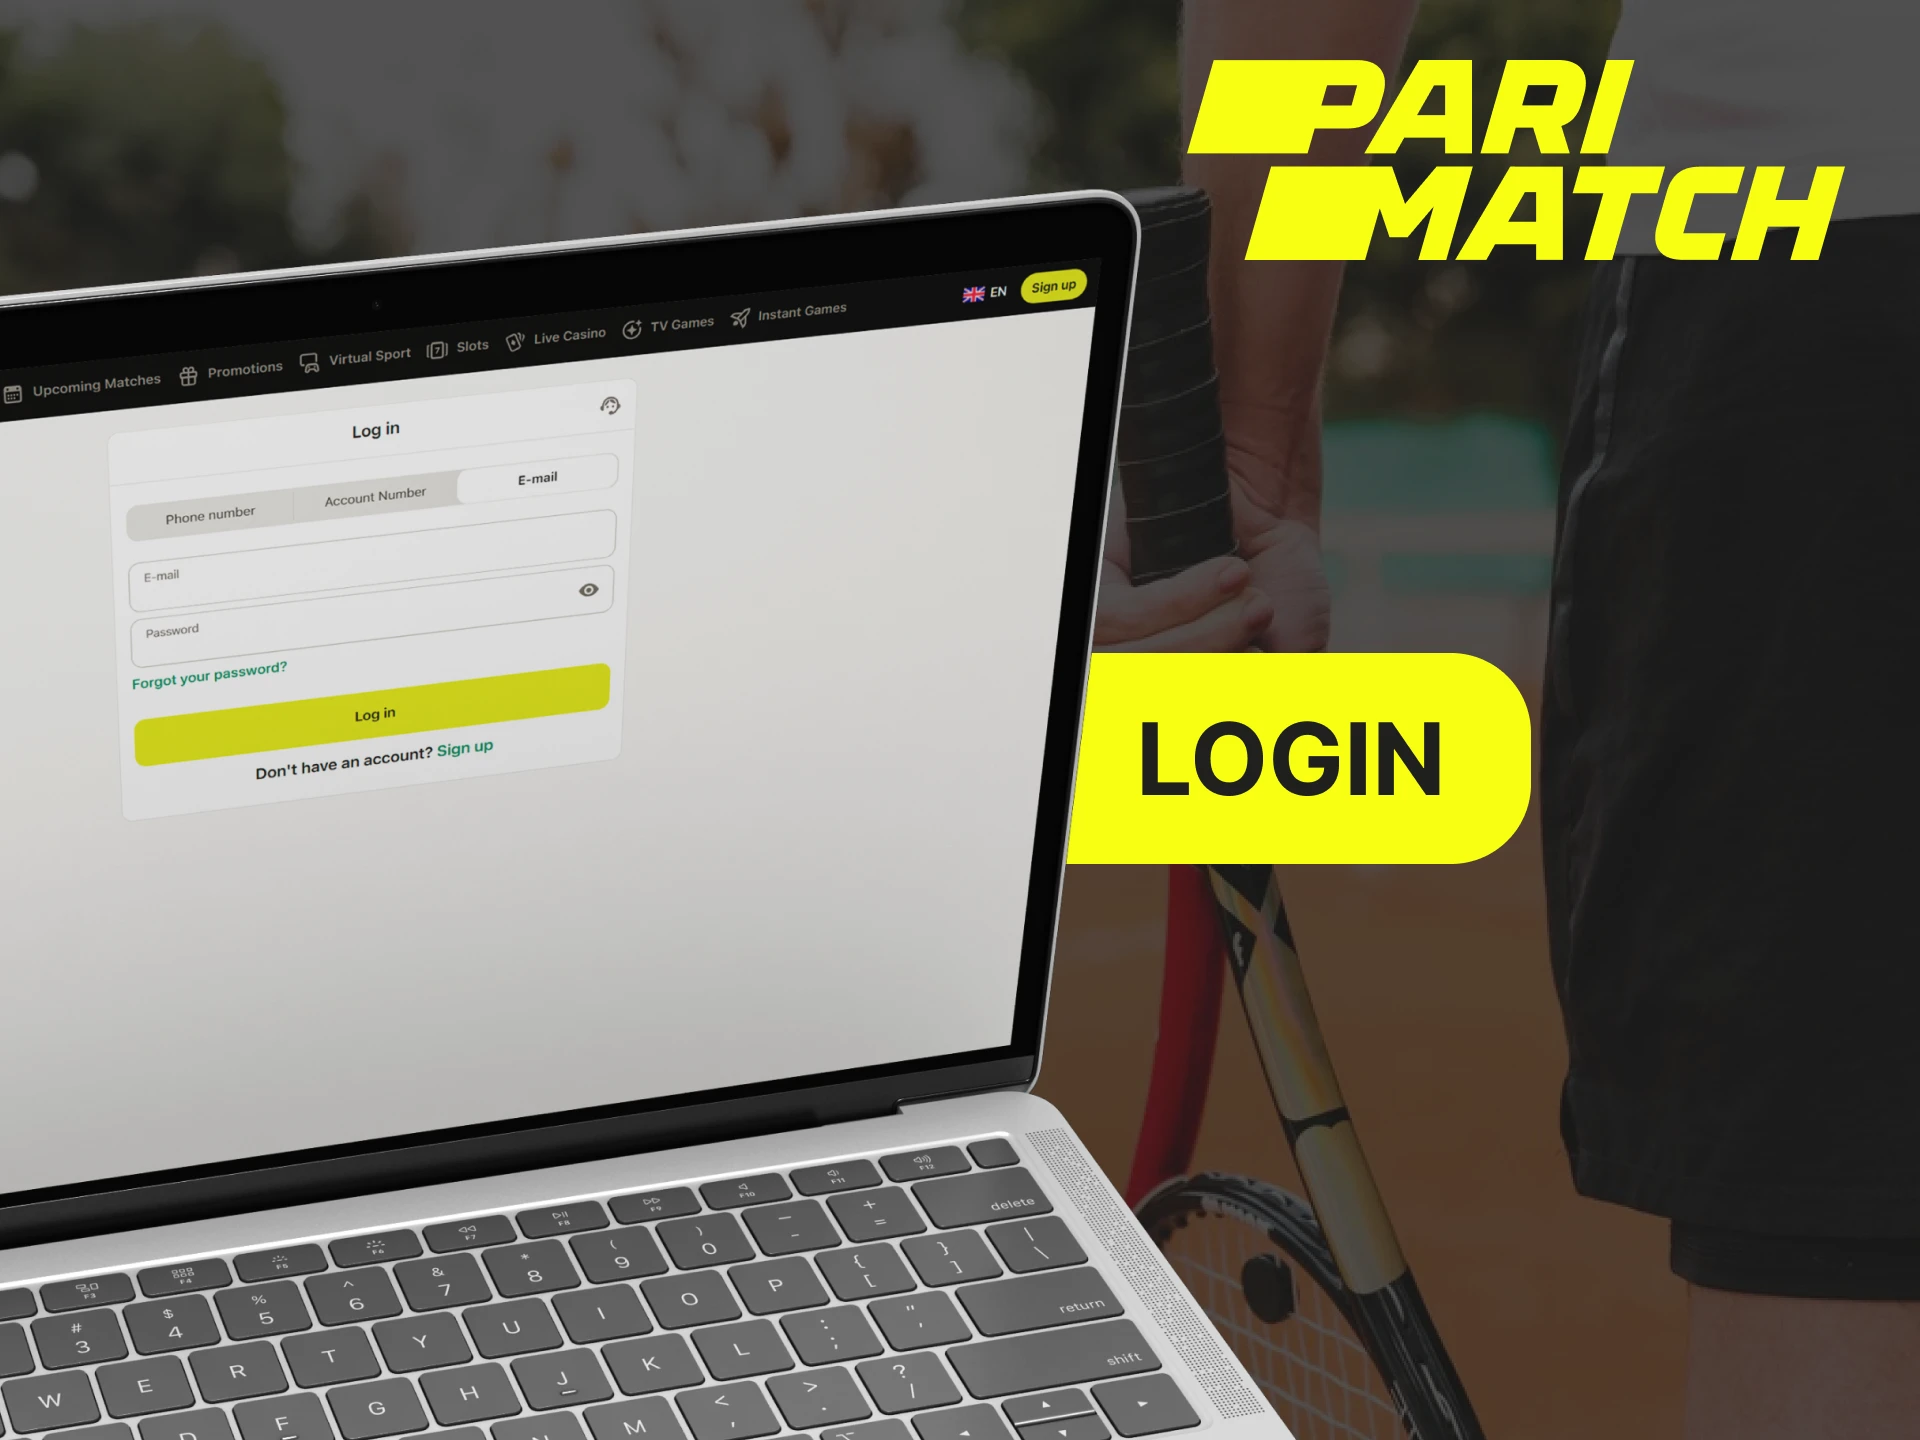 If you already have a Parimatch account, log in.